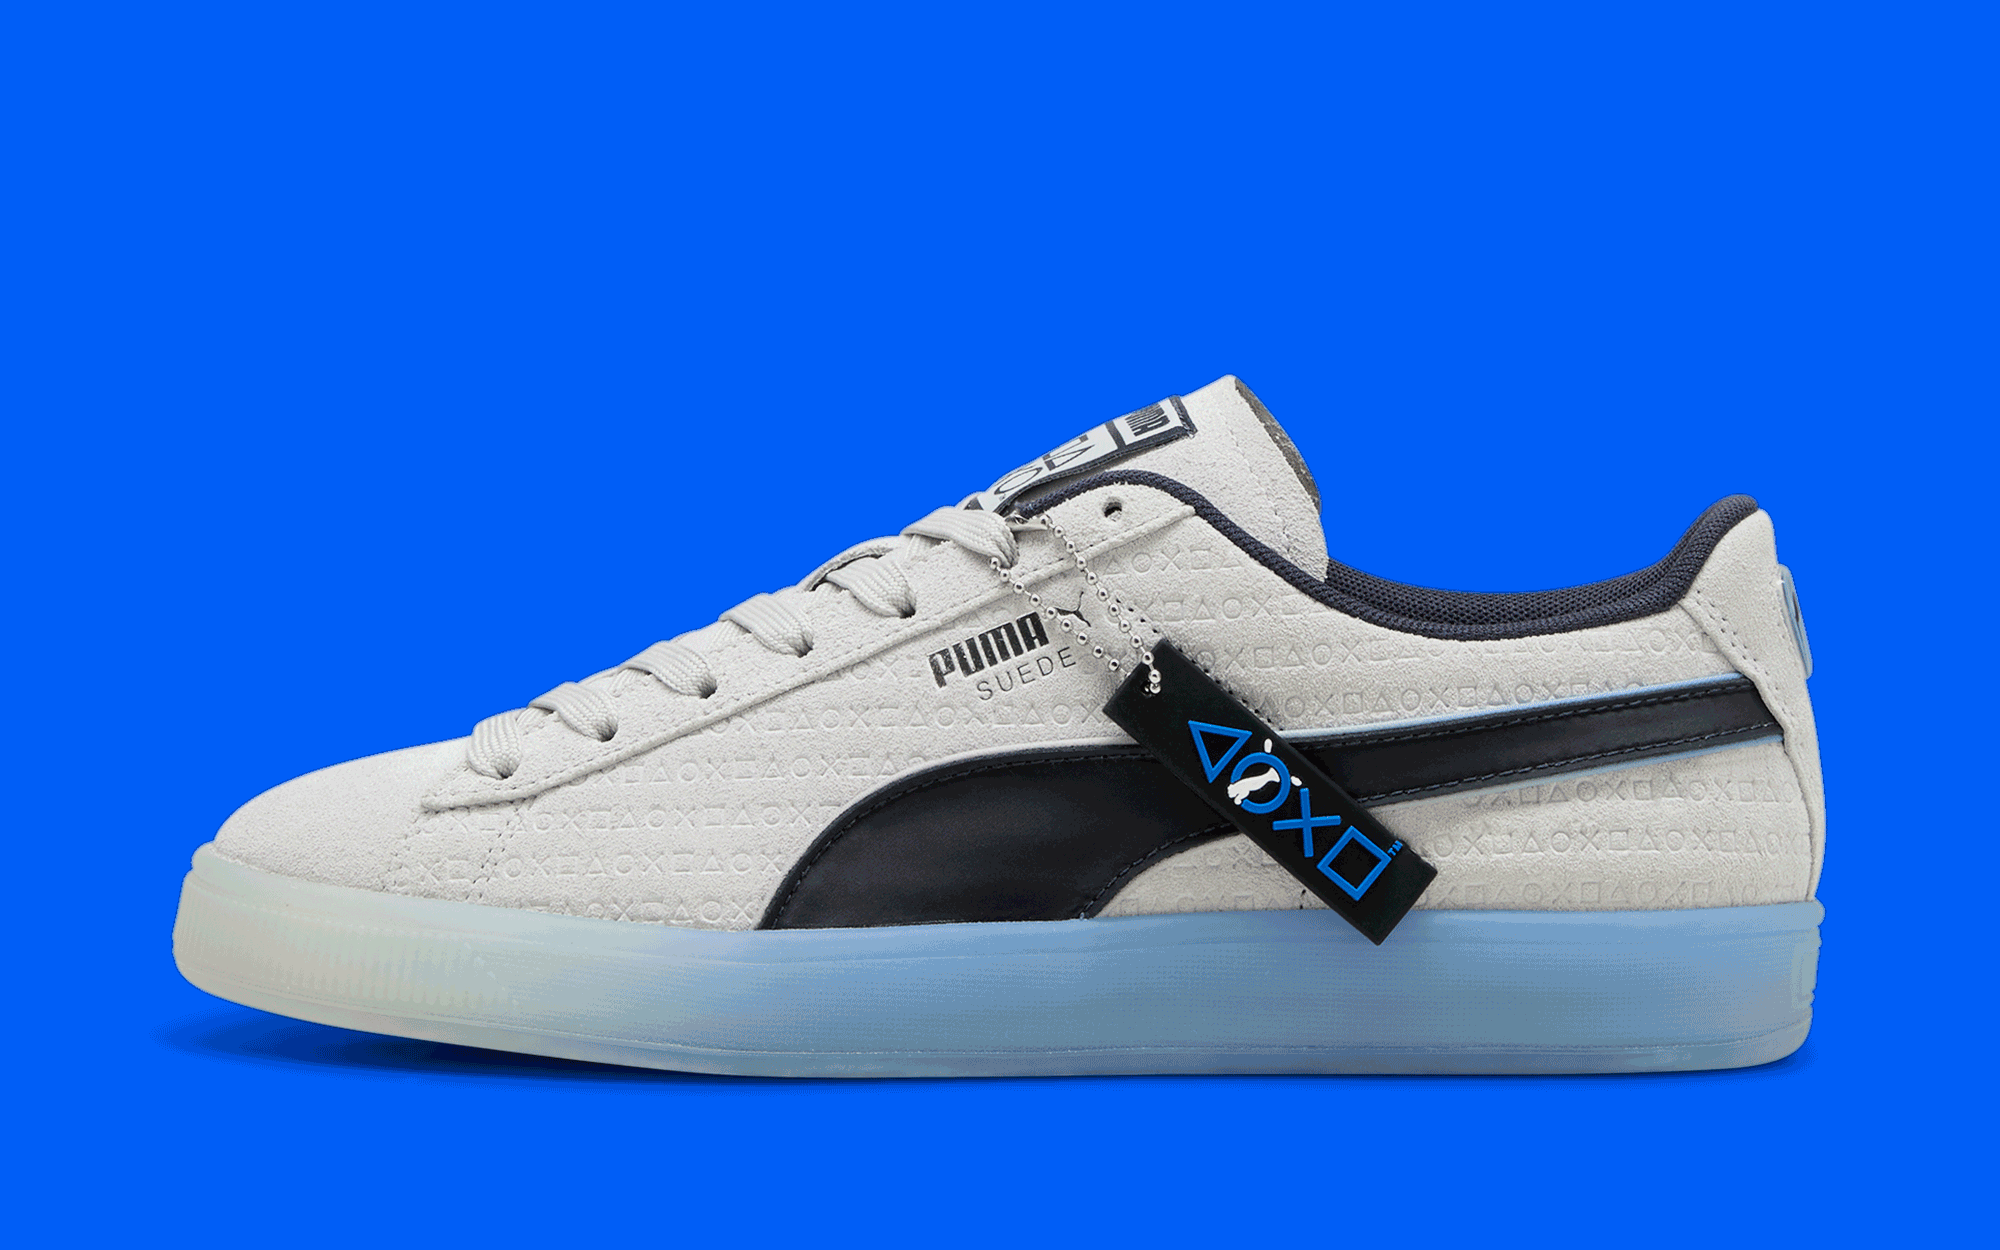 The Jeff Staple x PUMA Comments on the Duality of Man